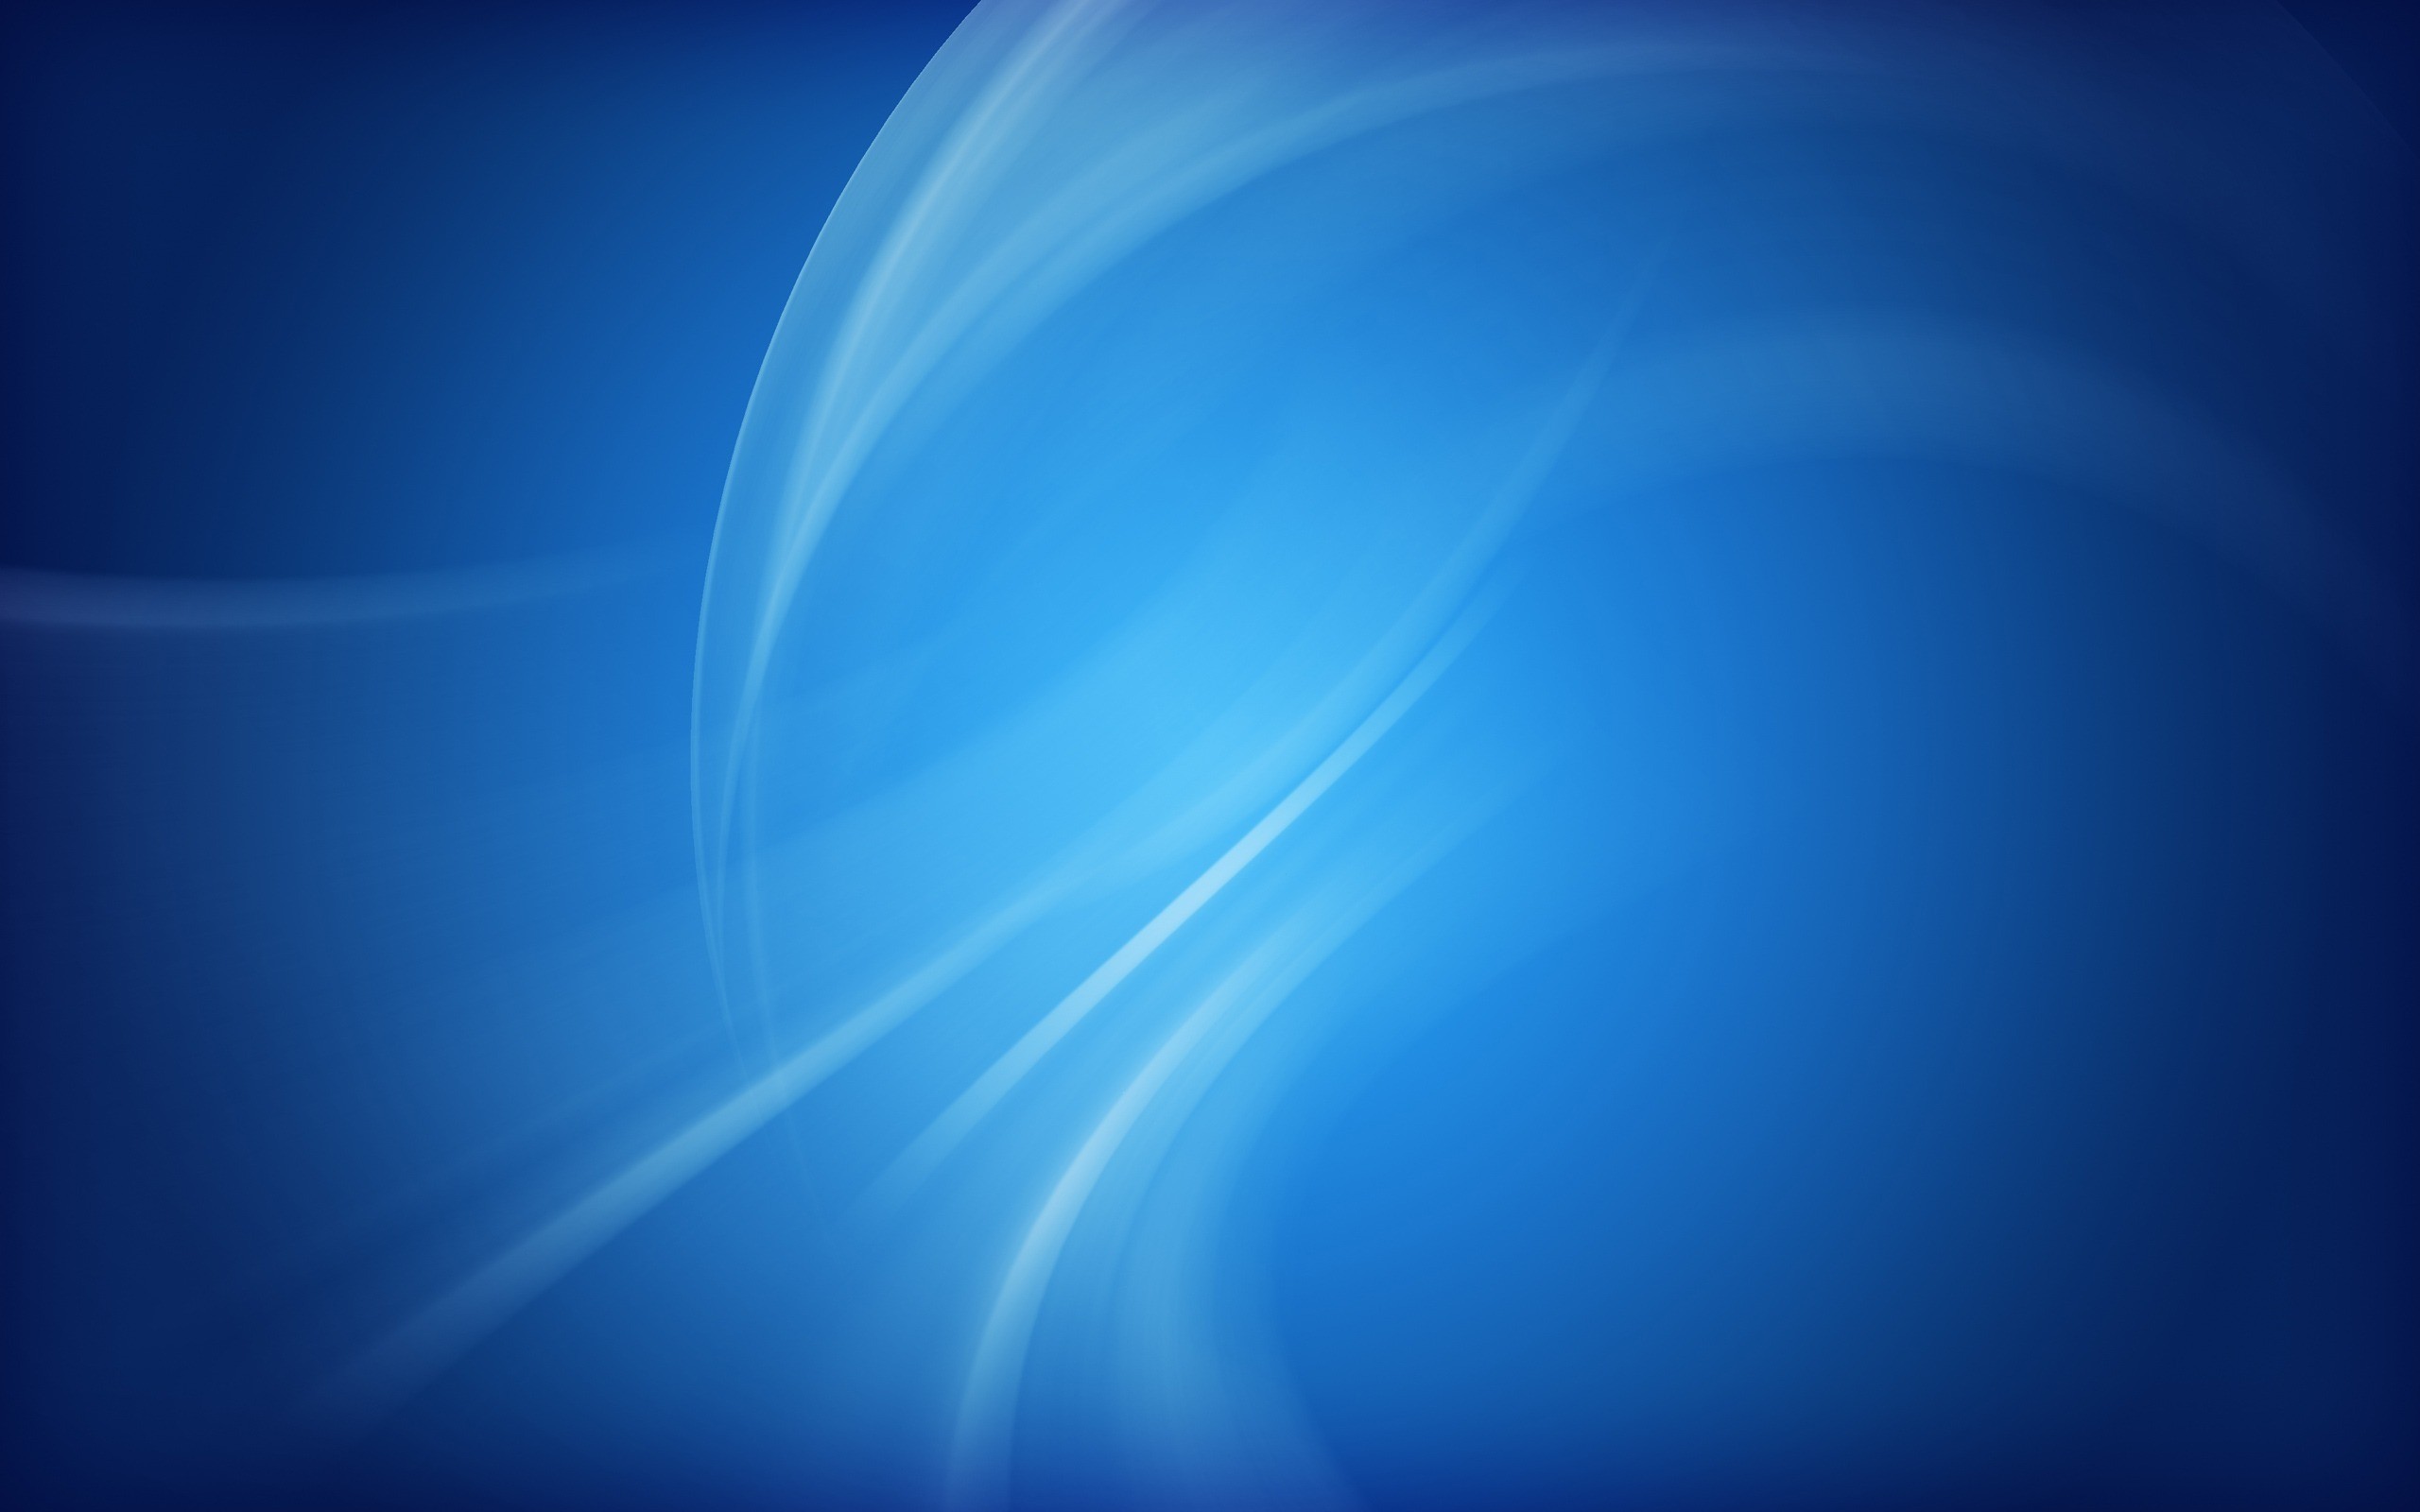  Blue  and White  background    Download free amazing 